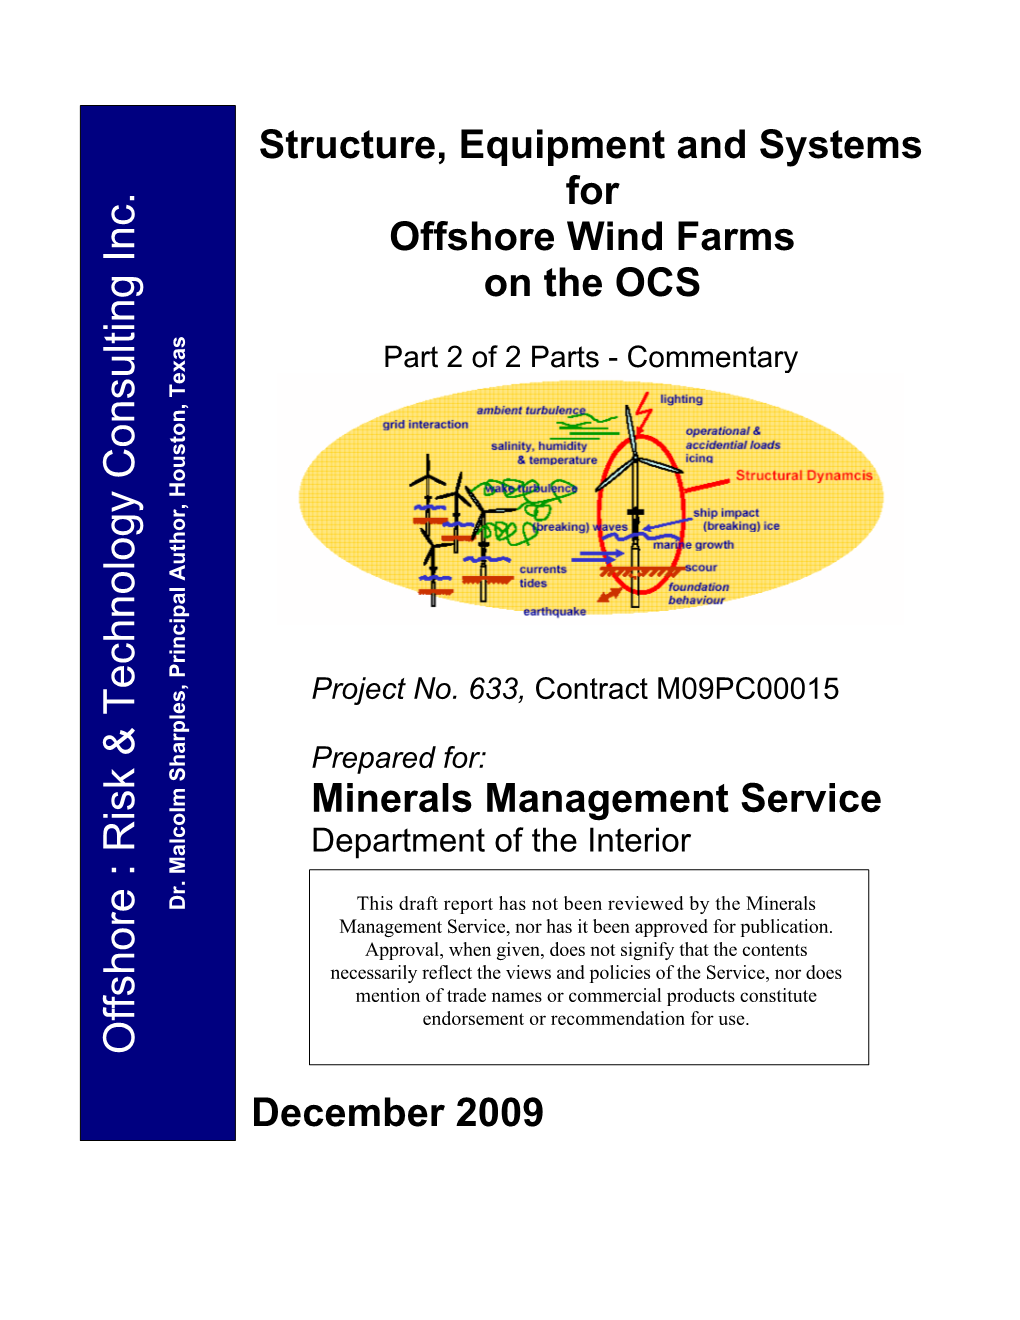 Structure, Equipment and Systems for Offshore Wind Farms on the OCS